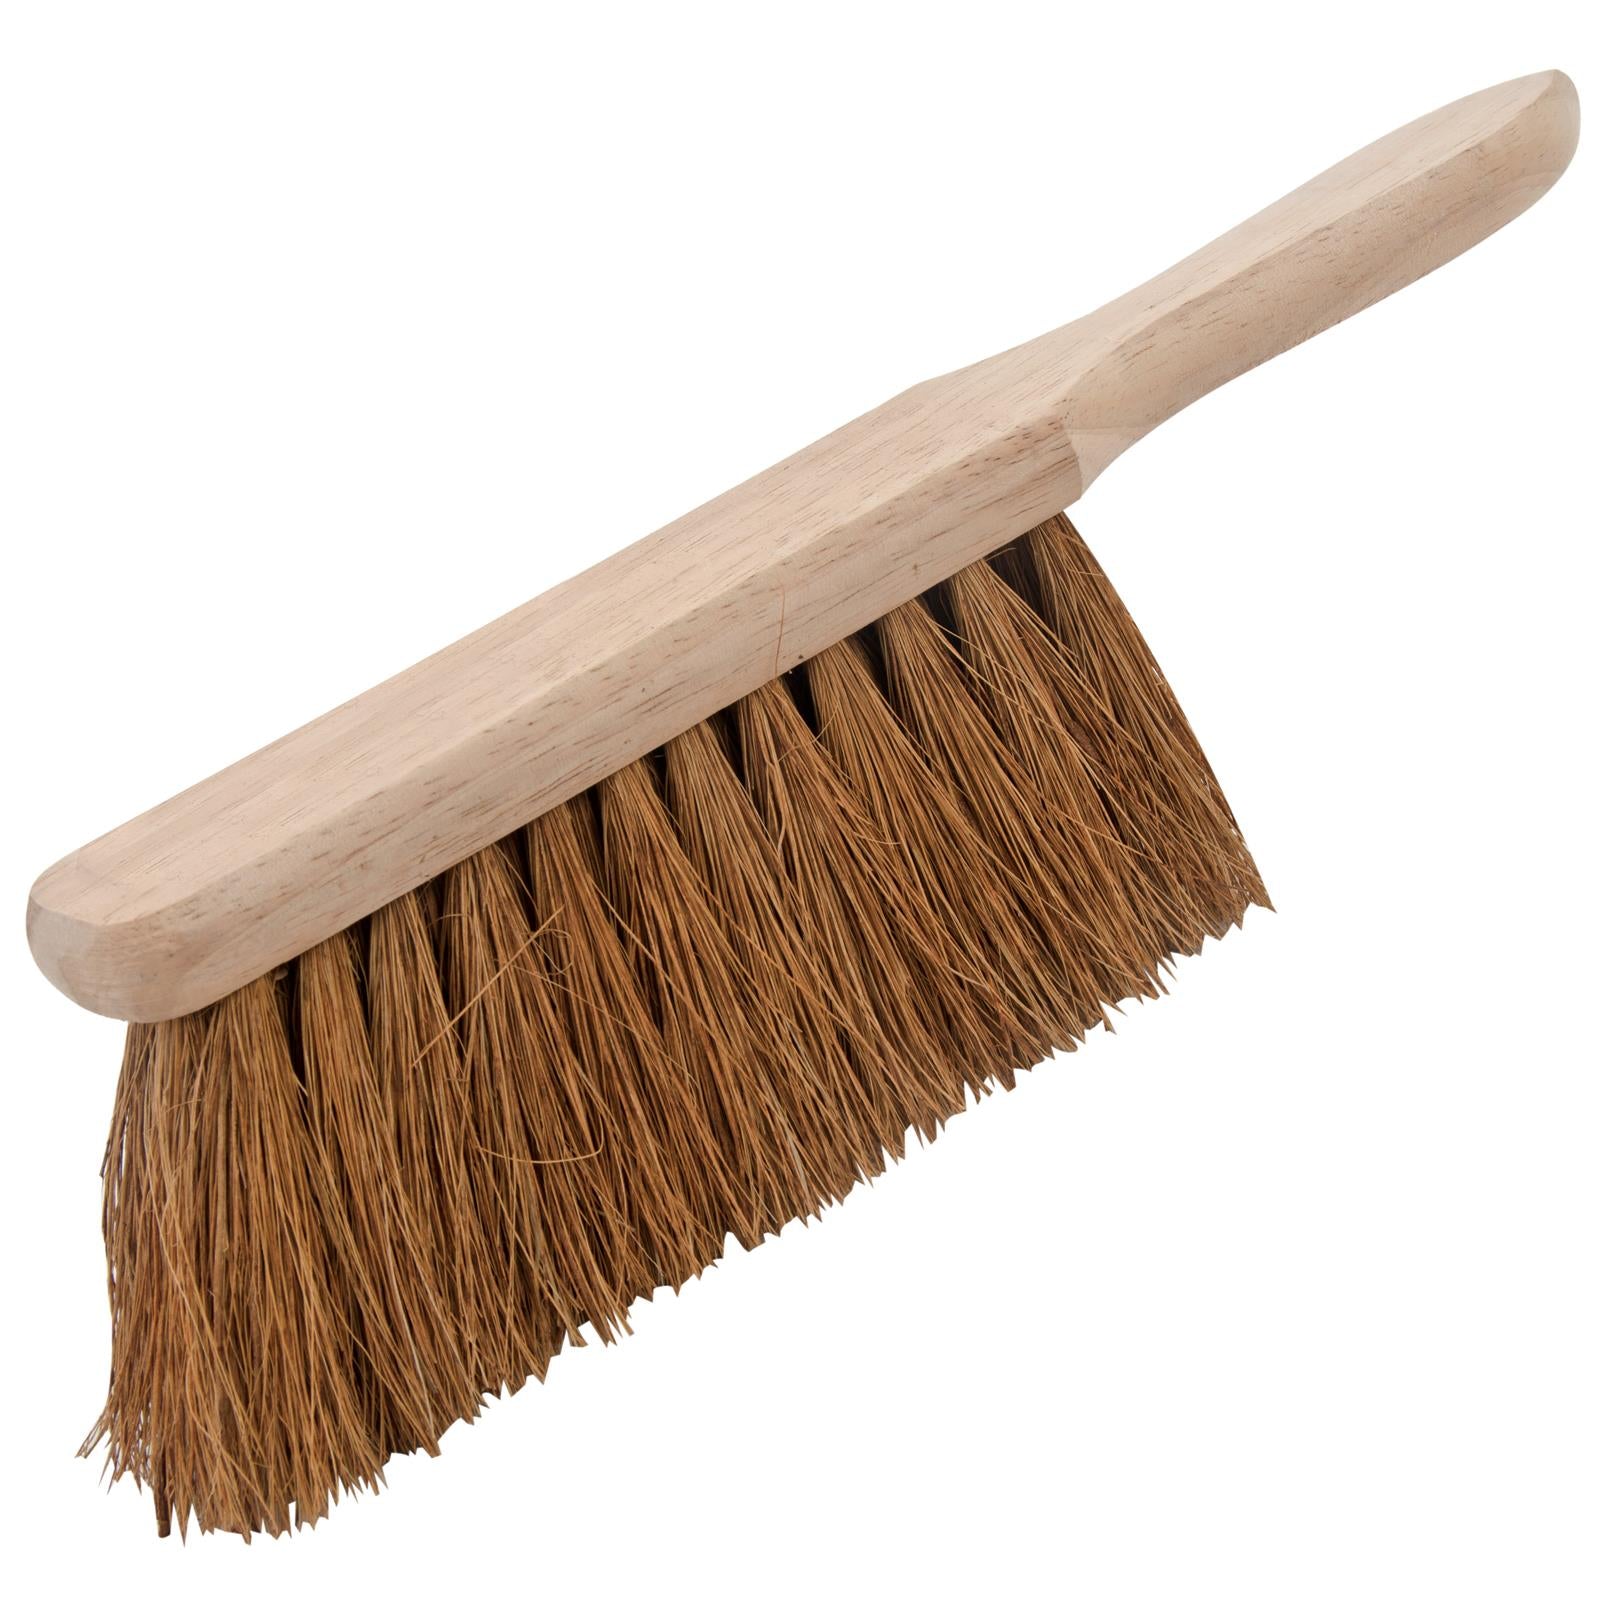 Silverline 12" Soft Coco Hand Brush Sweep Broom Clean Wooden Handle